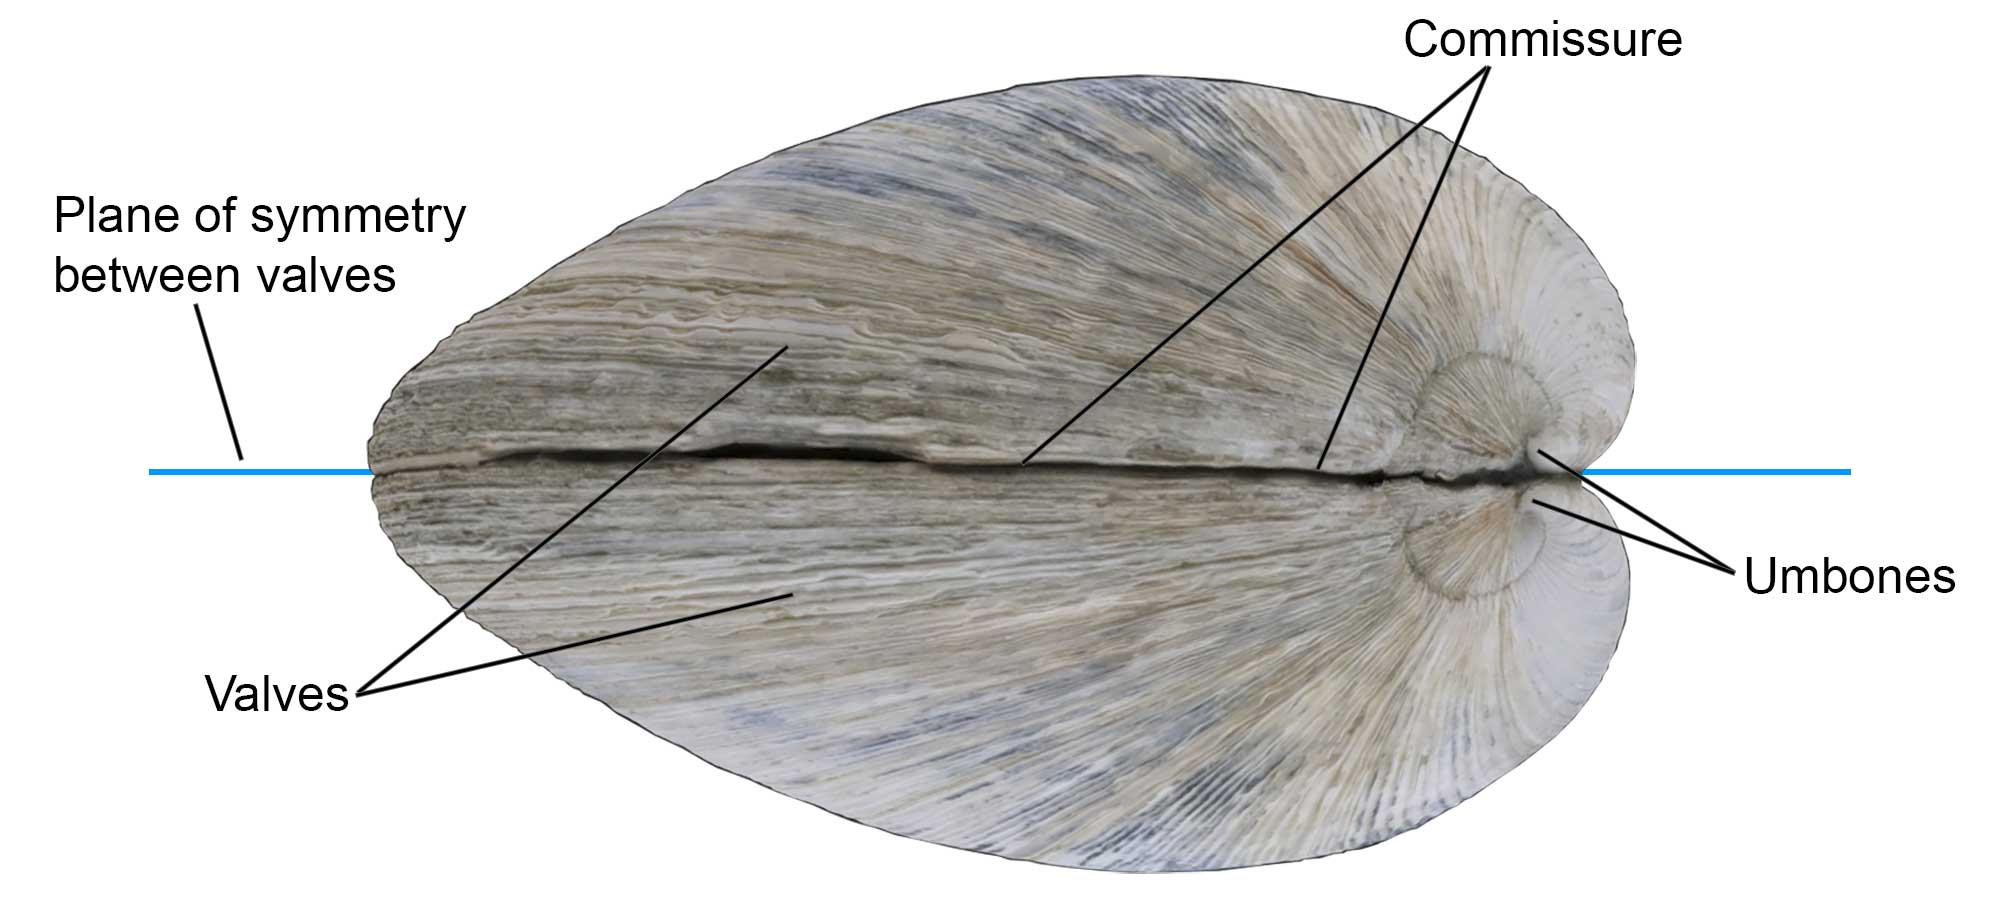 External features of the bivalve shell, including valves, commissure, and umbones.